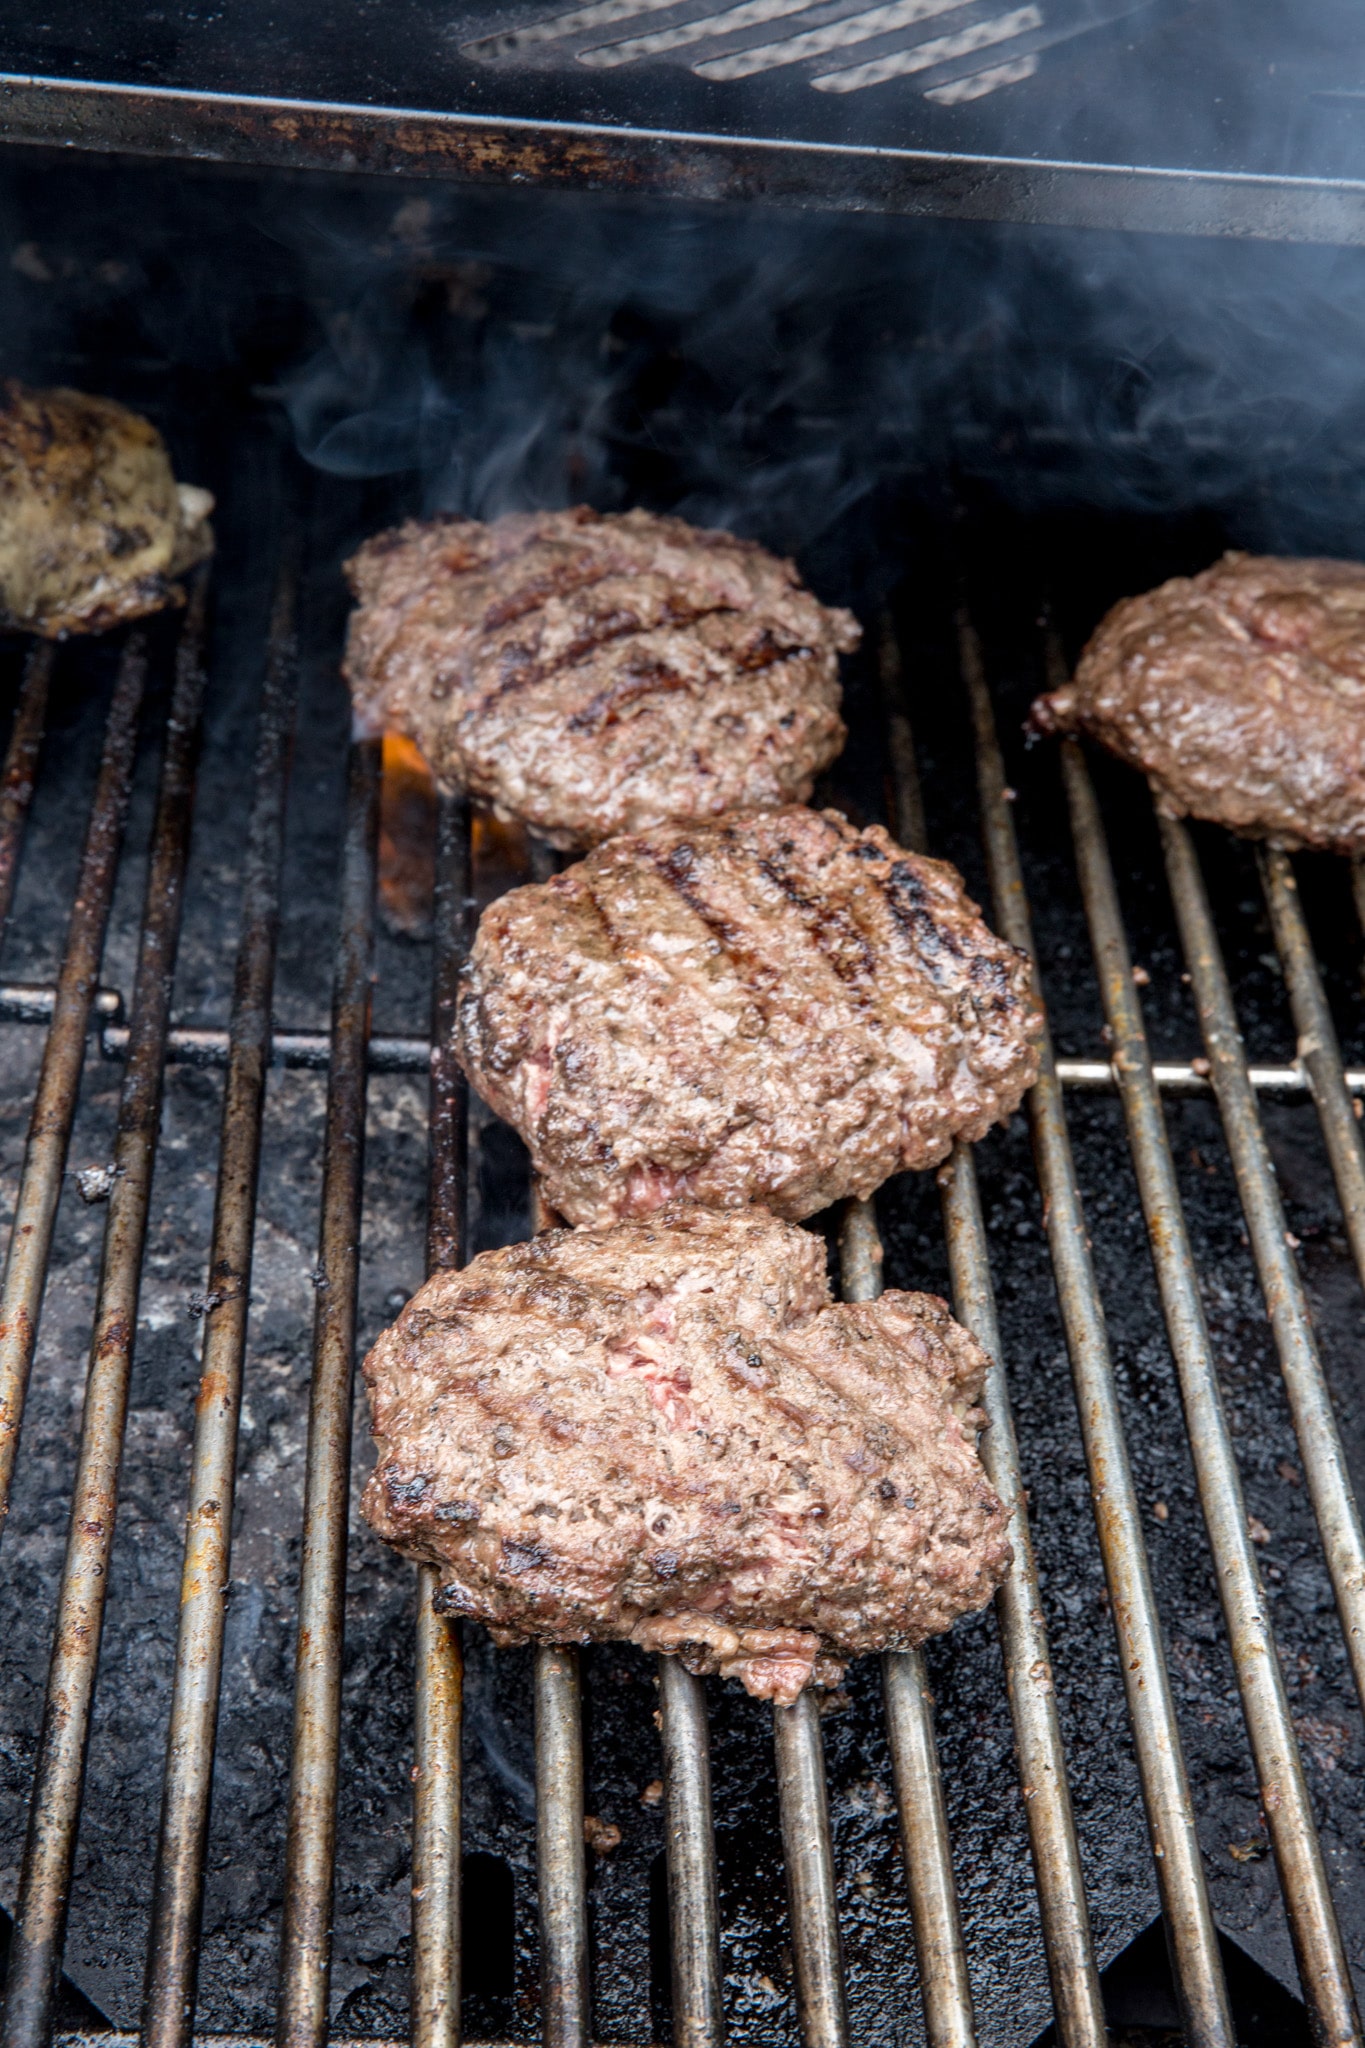 Cook the butter keto burger on the grill or stovetop